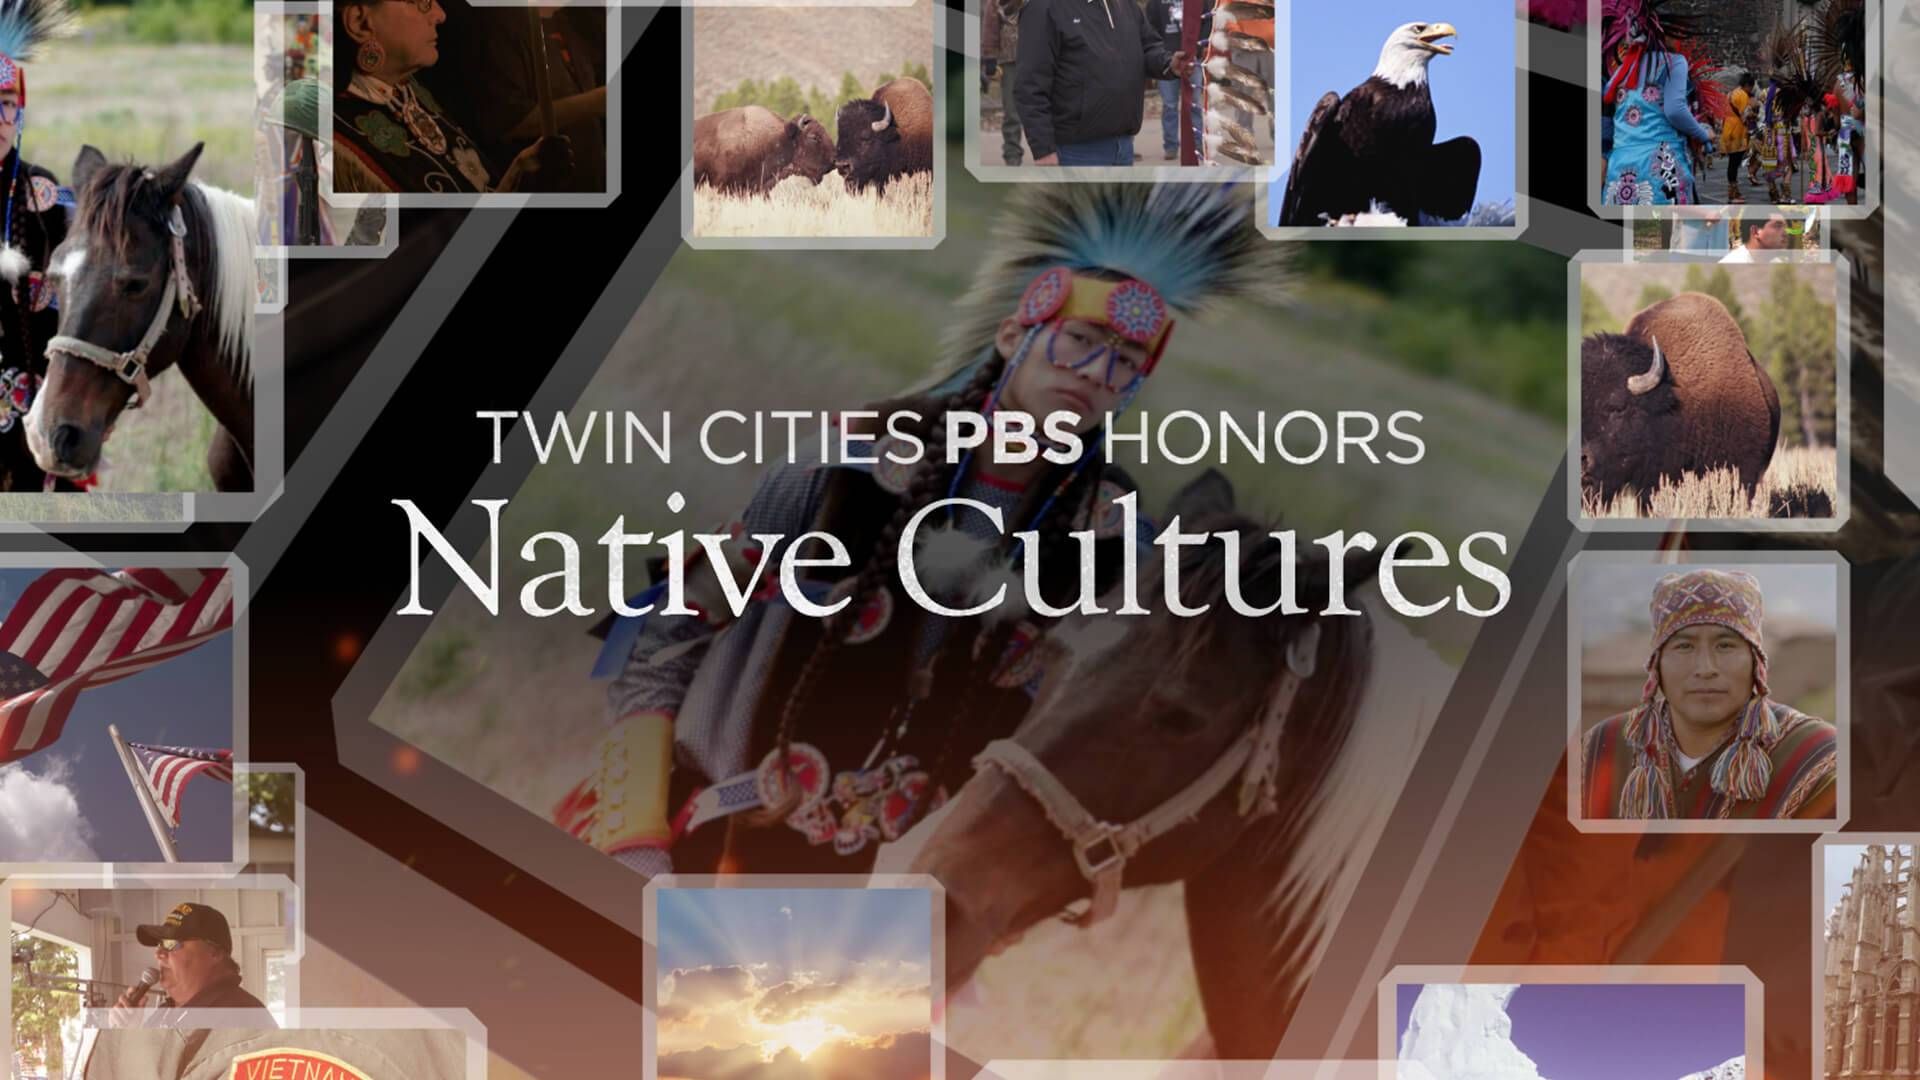 A compilation if images that includes: Native Americans, an eagle, buffalo, horses, and American flags.  The images surround the title "Twin Cities PBS Honors Native Cultures"